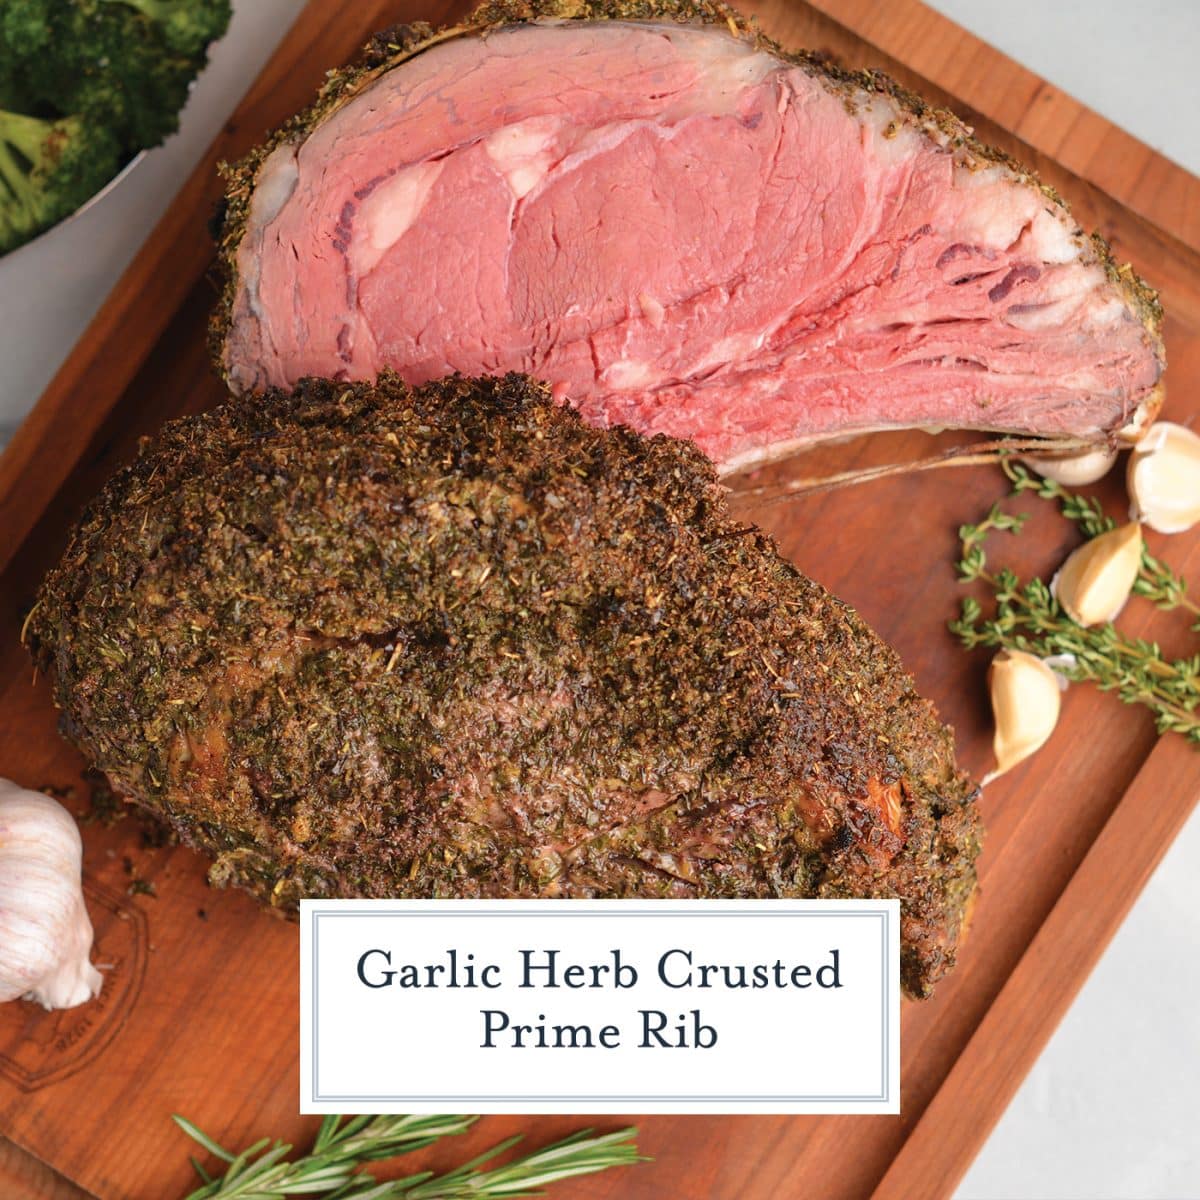 garlic herb crusted prime rib with text overlay